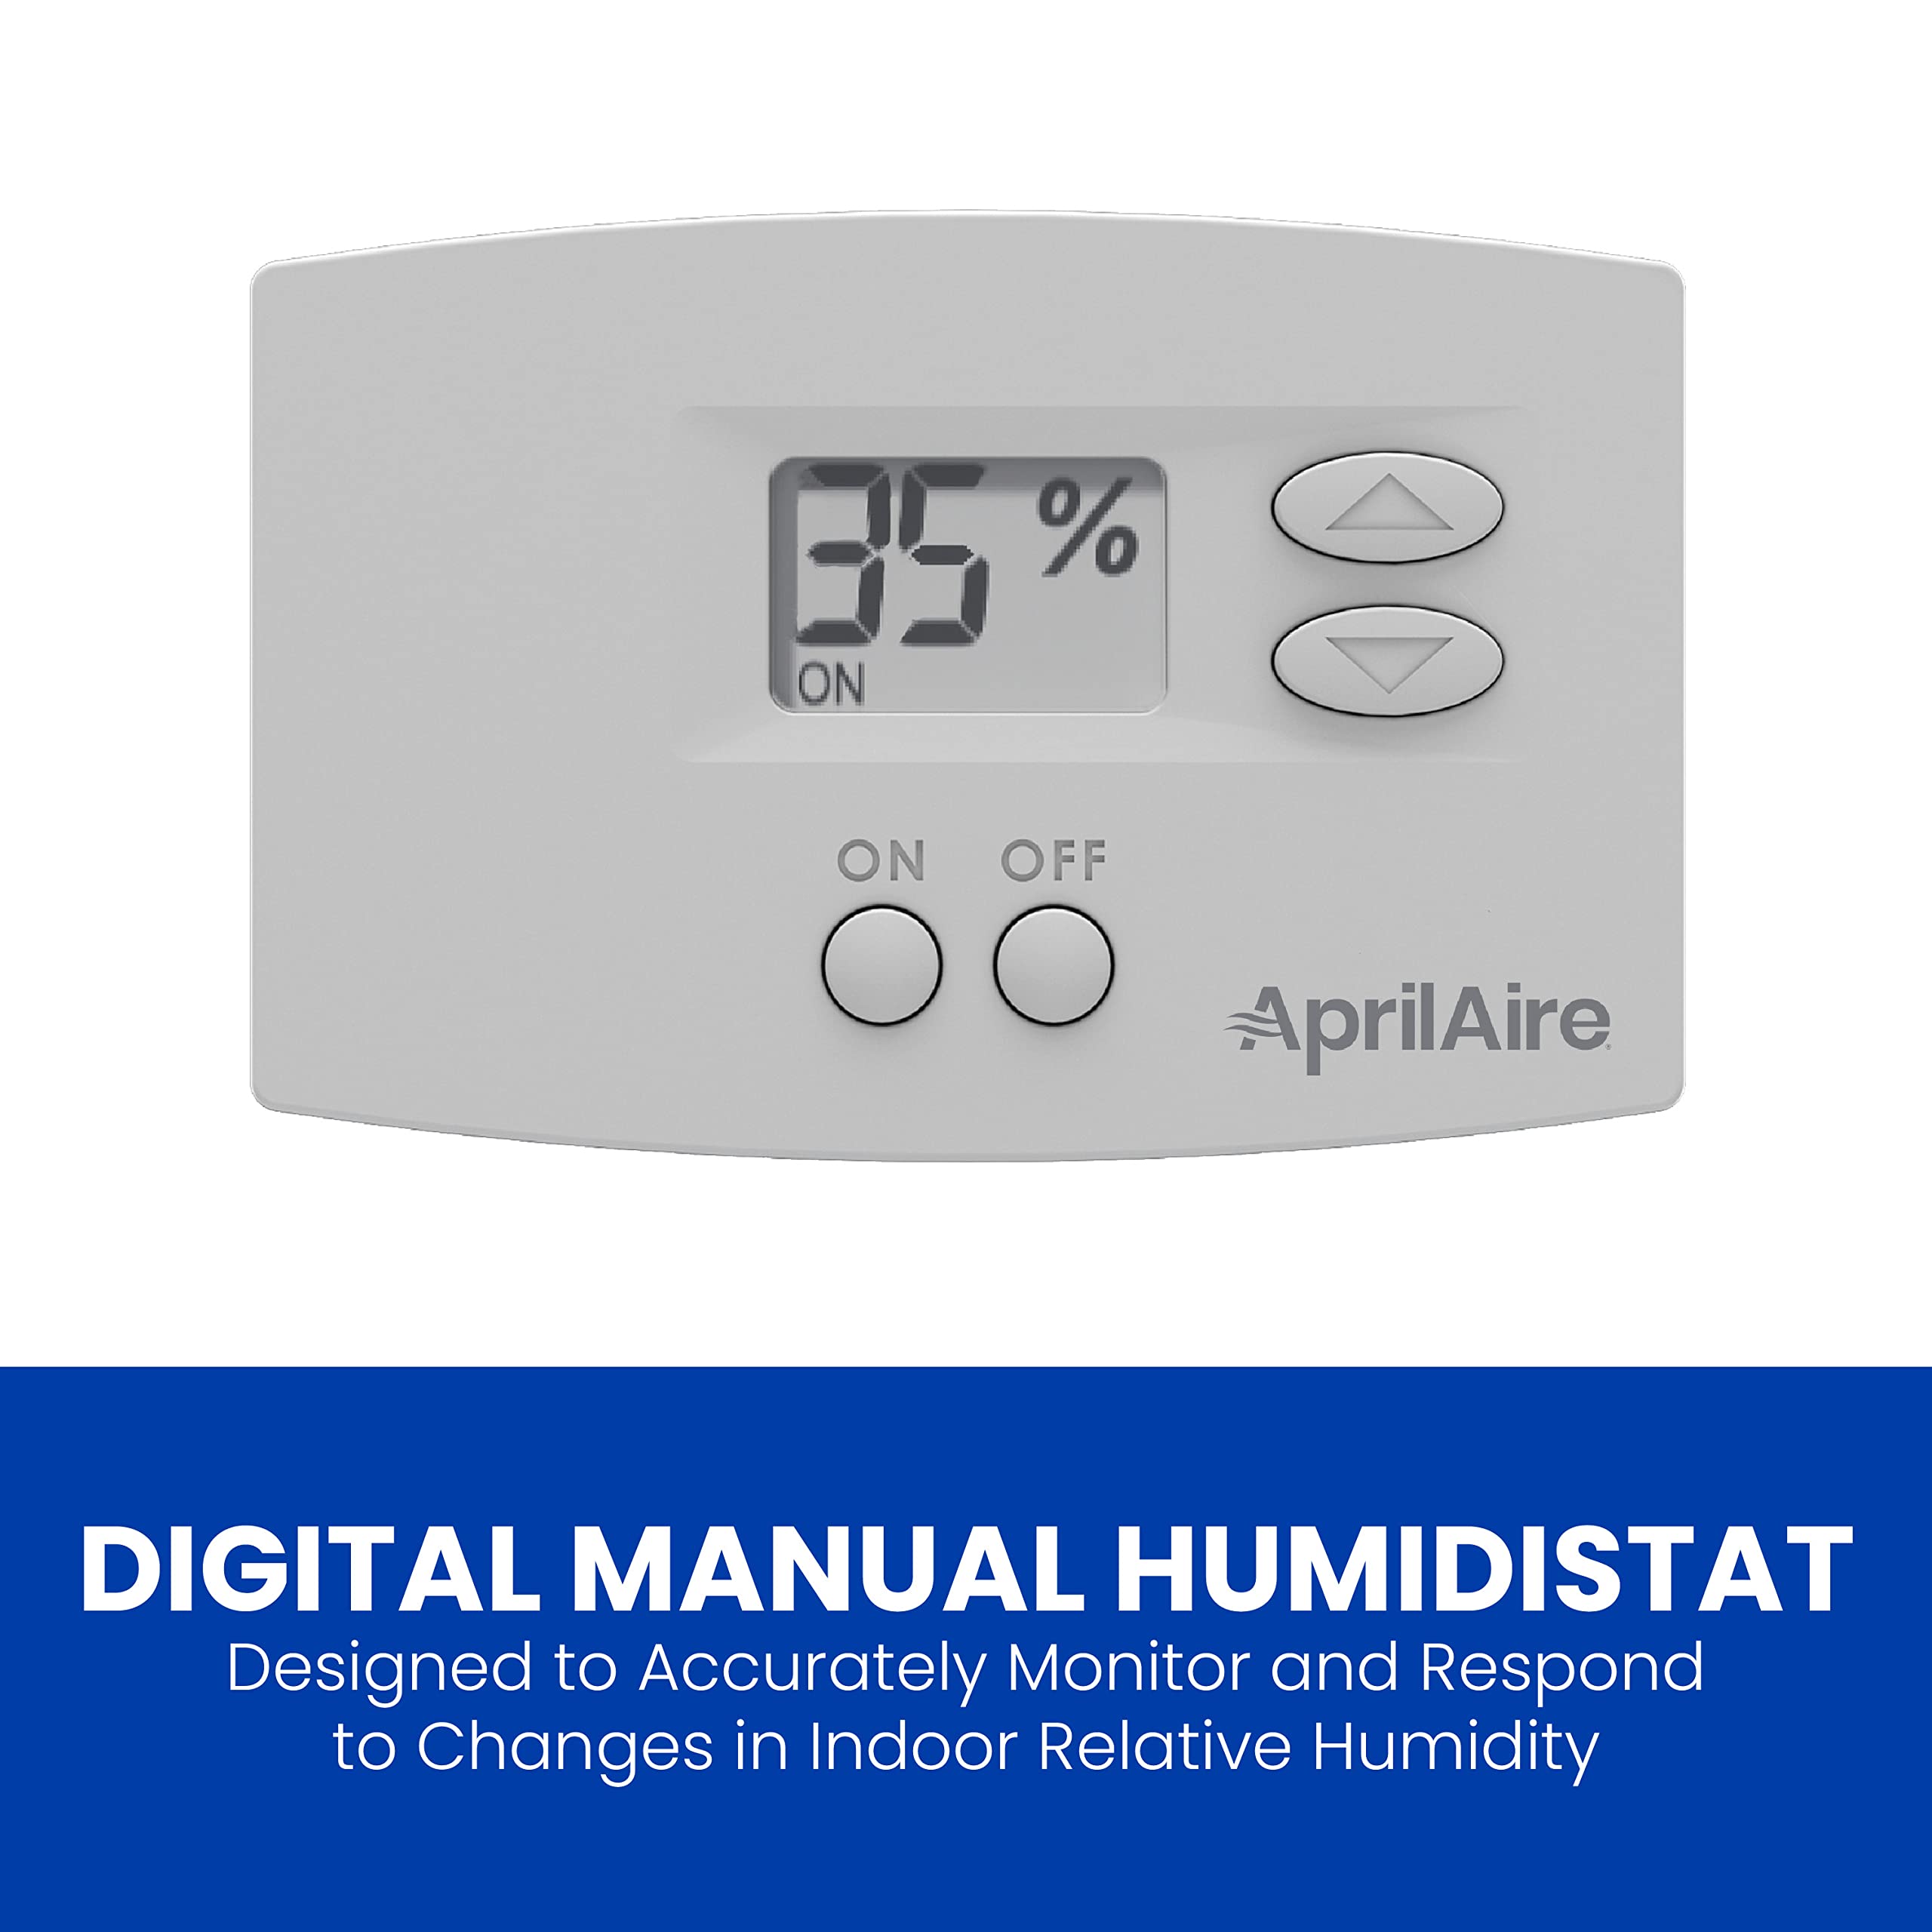 AprilAire 300 Self-Contained Fan Powered Whole House Humidifier, for Homes with Ducted Forced Air Furnace Systems, Boilers, Mini-Splits, Radiant Heat, and Other Ductless Systems up to 3,900 Sq. Ft.